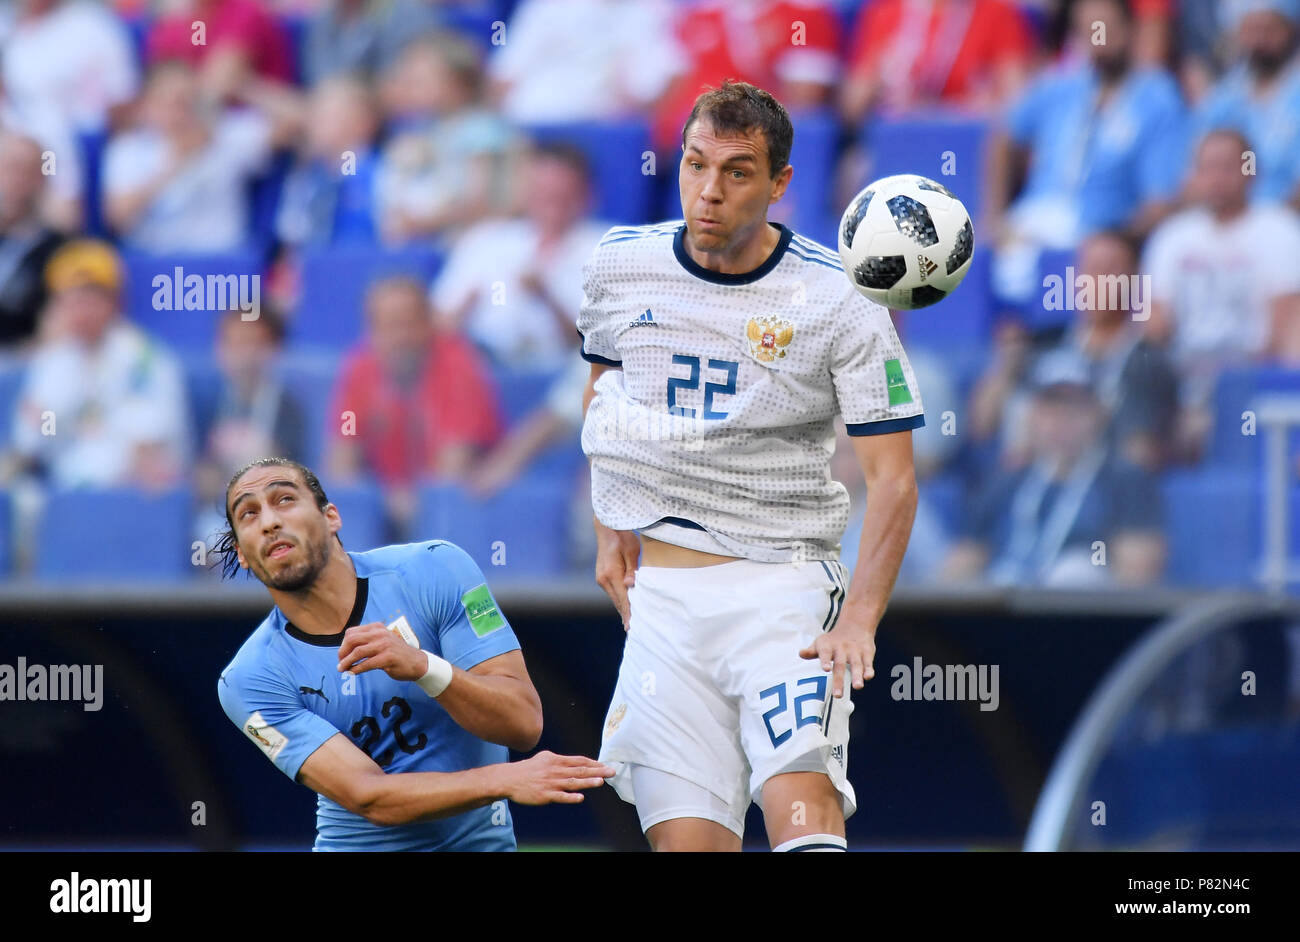 SAMARA, RUSSIA - JUNE 25: Martin Caceres of Uruguay competes with Artem Dzyuba of Russia during the 2018 FIFA World Cup Russia group A match between Uruguay and Russia at Samara Arena on June 25, 2018 in Samara, Russia. (Photo by Lukasz Laskowski/PressFocus/MB Media) Stock Photo